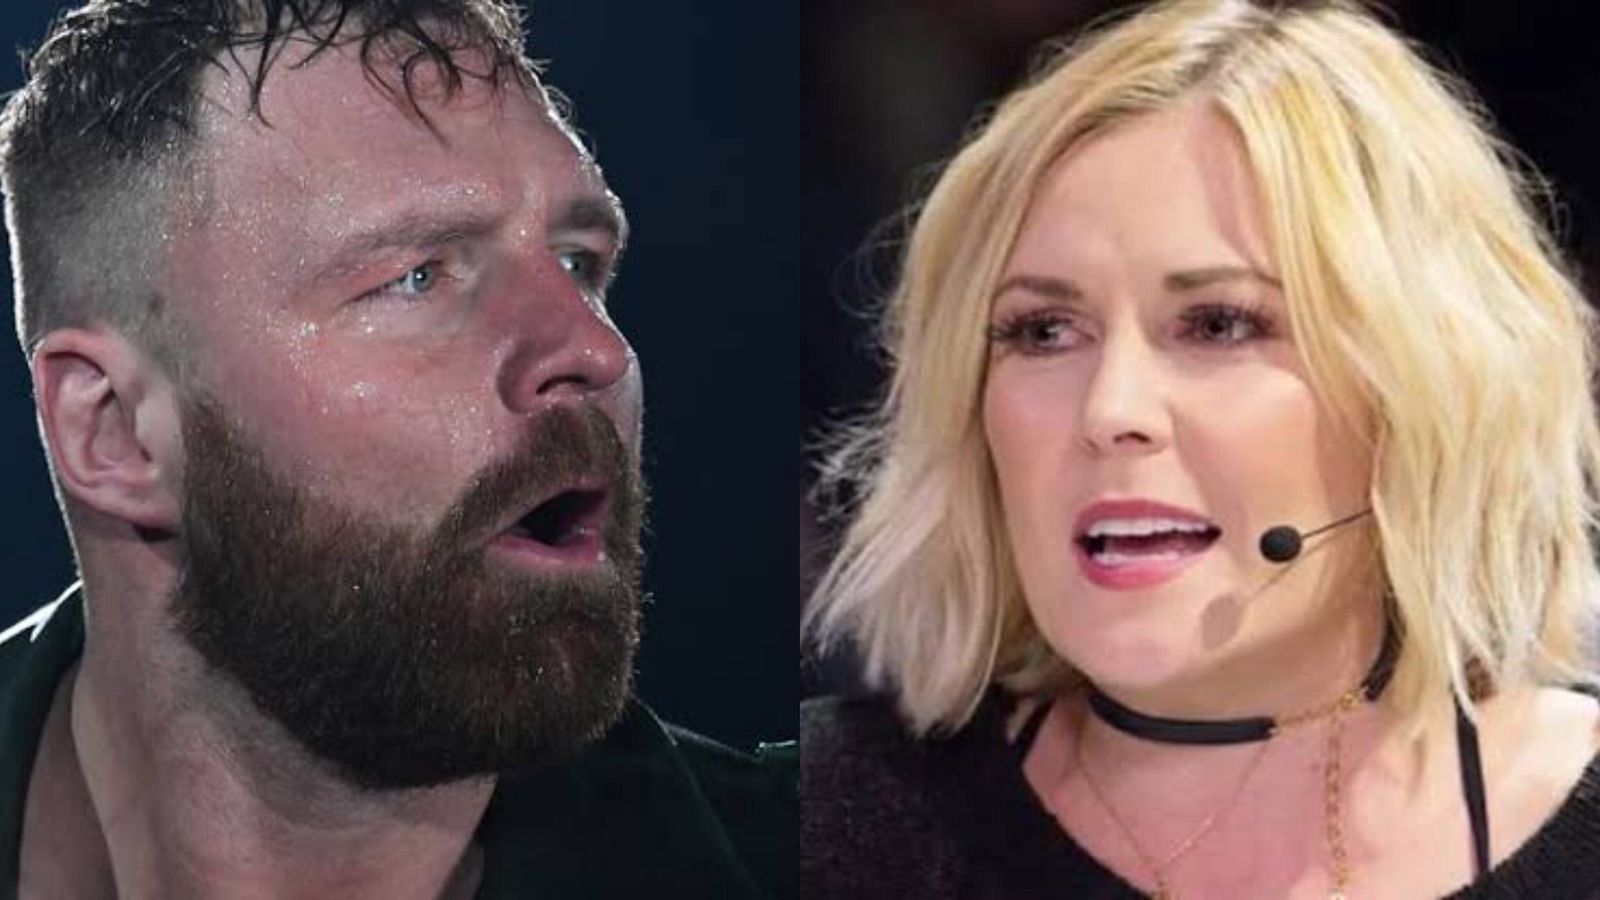 Renne Paquette is married to AEW star Jon Moxley